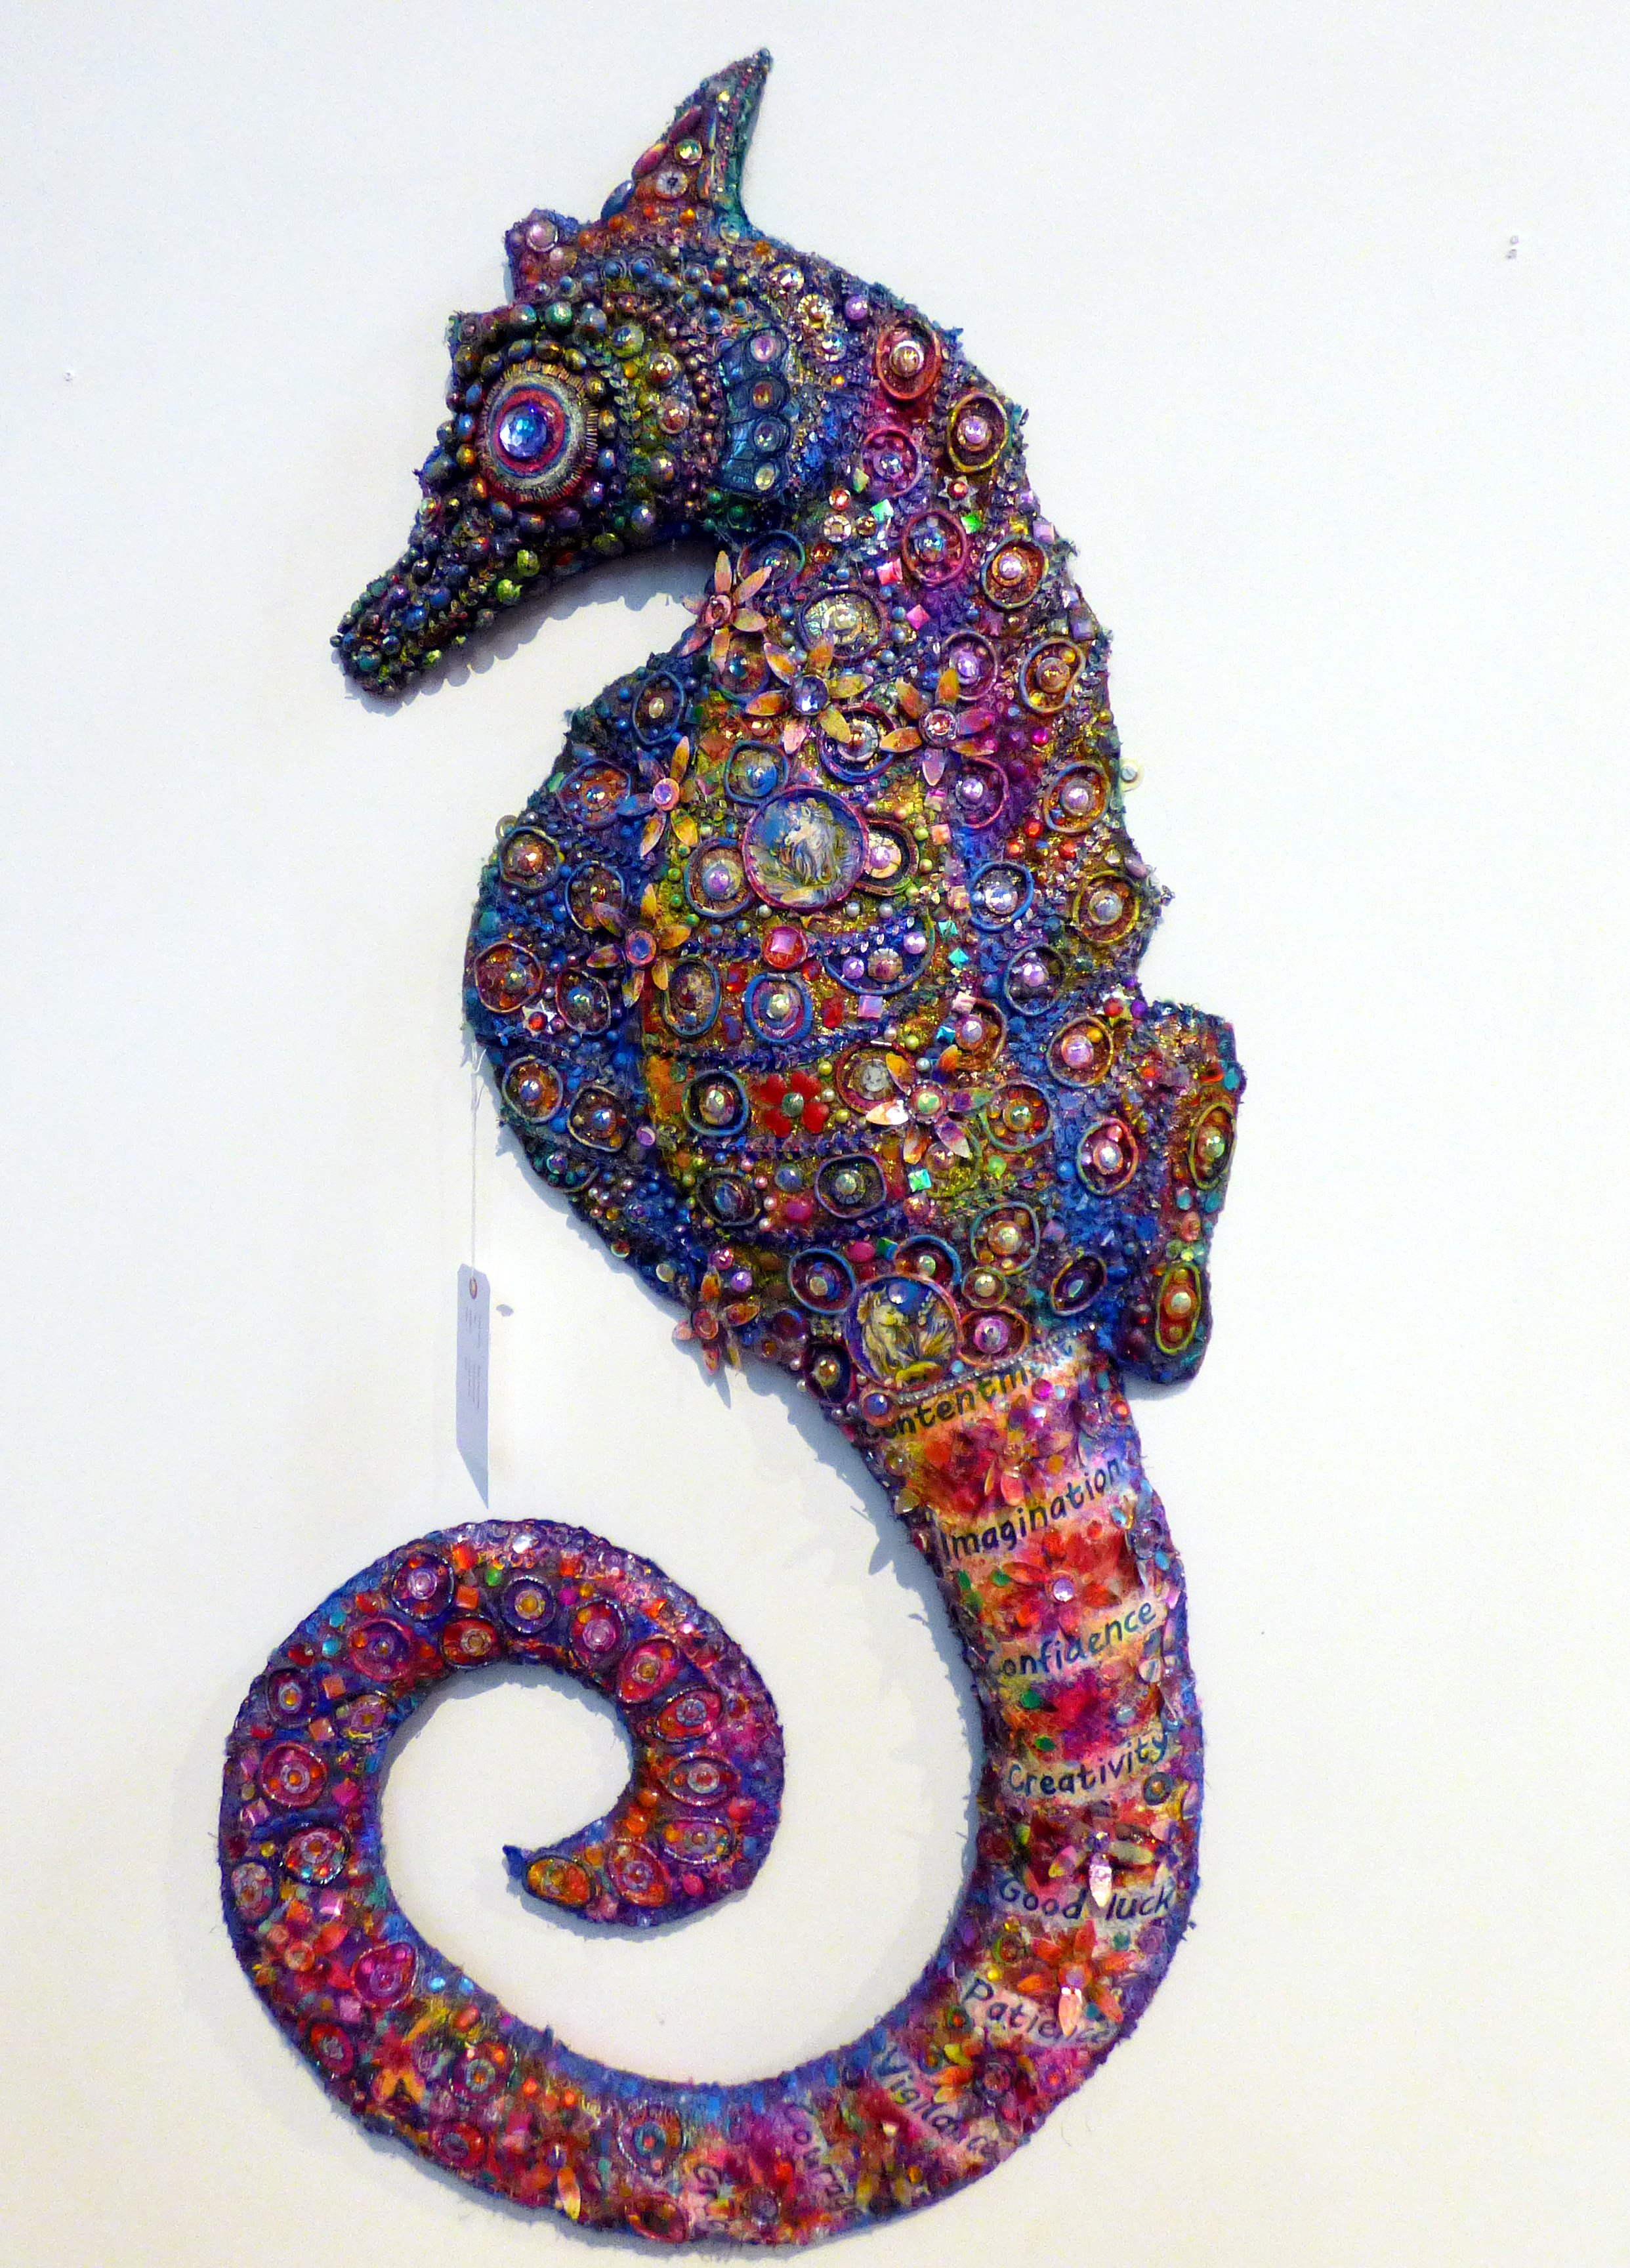 THE SEAHORSE by Nikki Parmenter, mixed media, On The Edge Of exhibition, Chester Cathedral 2019